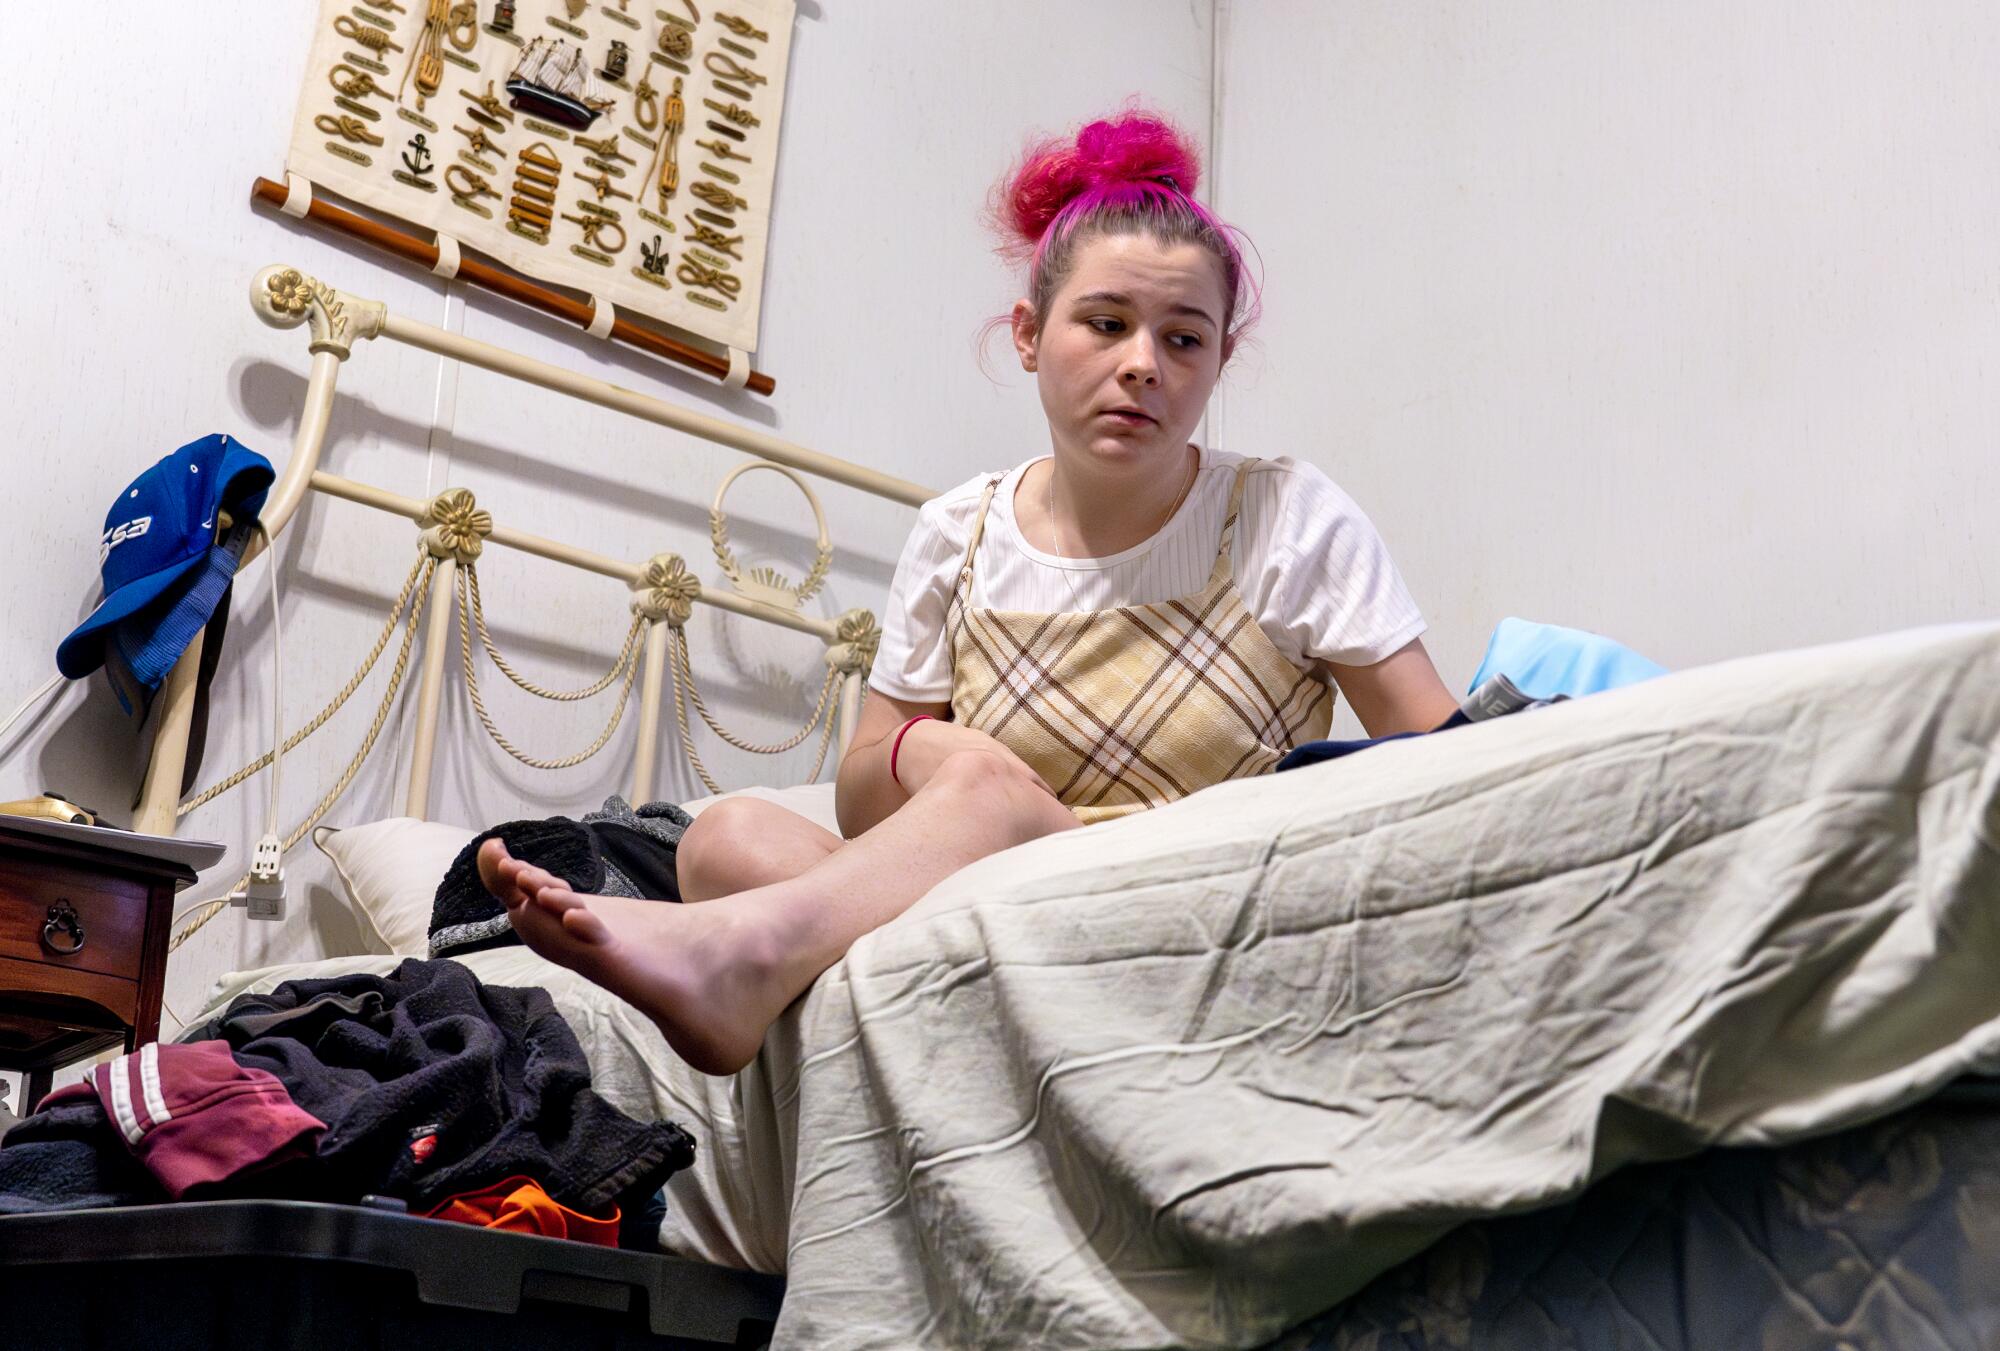 Framed  from a low angle, a teen girl sits on a bed, staring off with a forlorn look